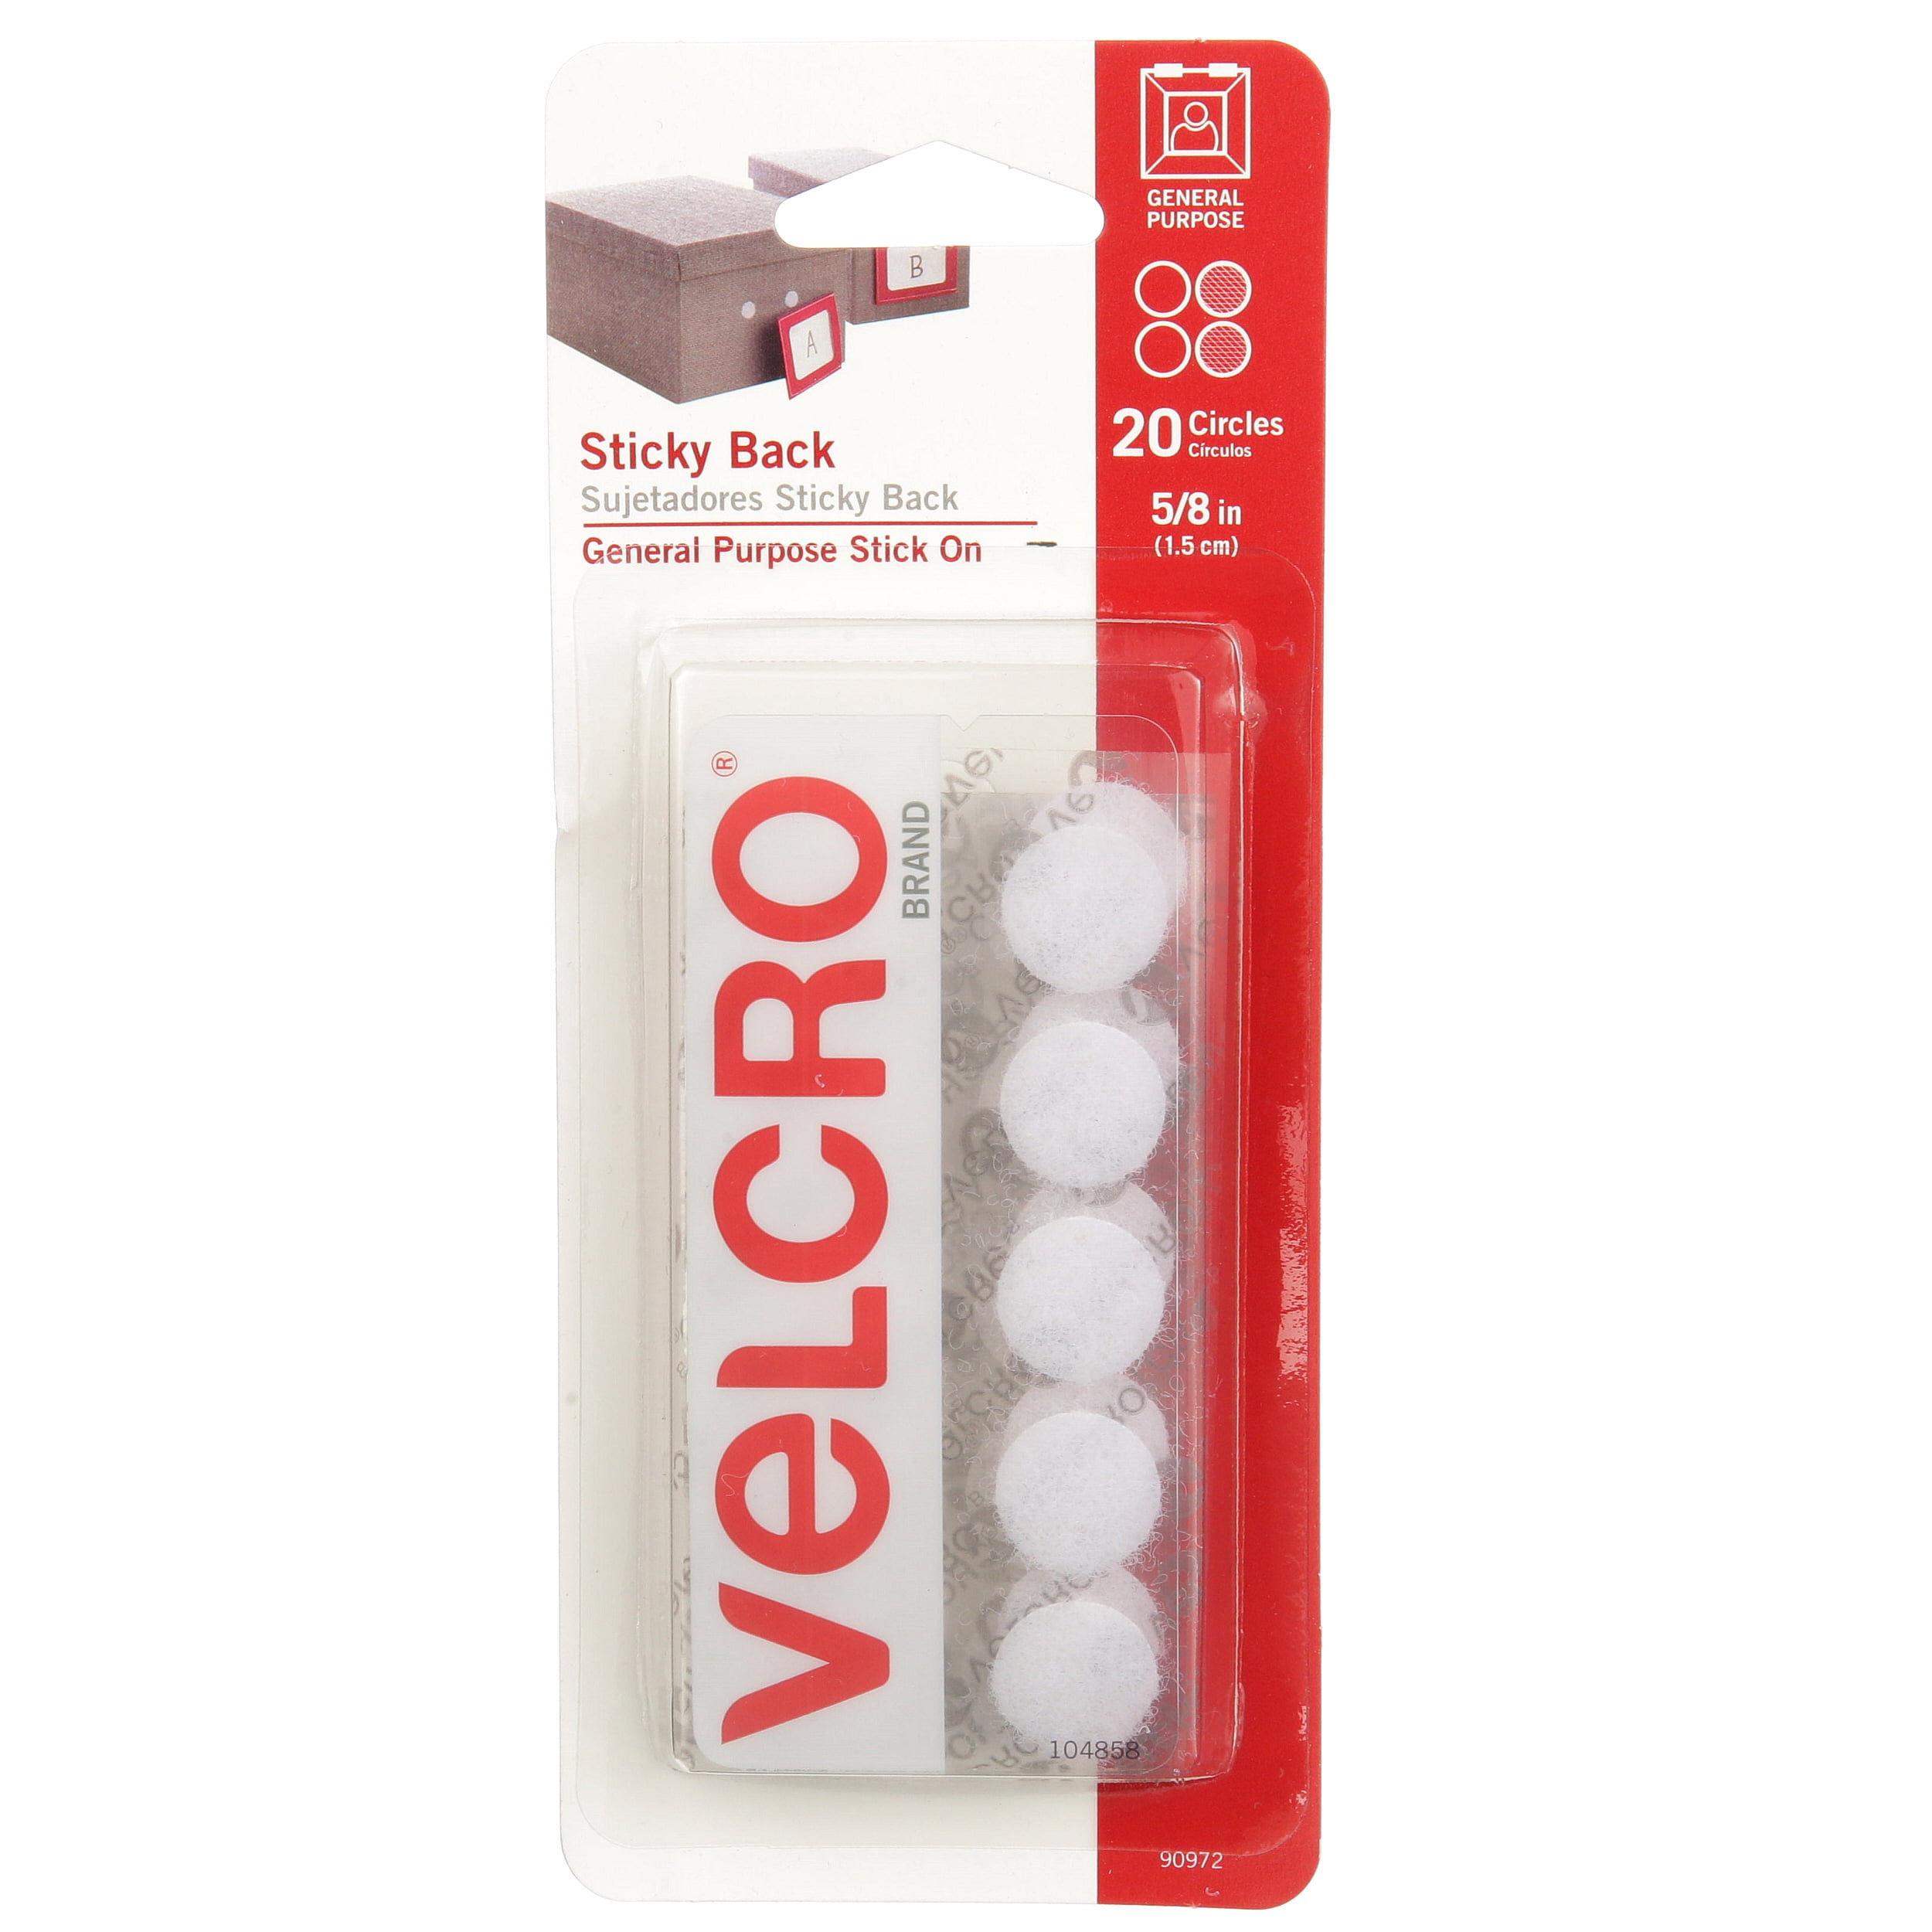 VELCRO Brand Dots with Adhesive | Sticky Back Round Hook and Loop Closures for Organizing, Arts and Crafts, School Projects, 5/8in Circles White 20 ct